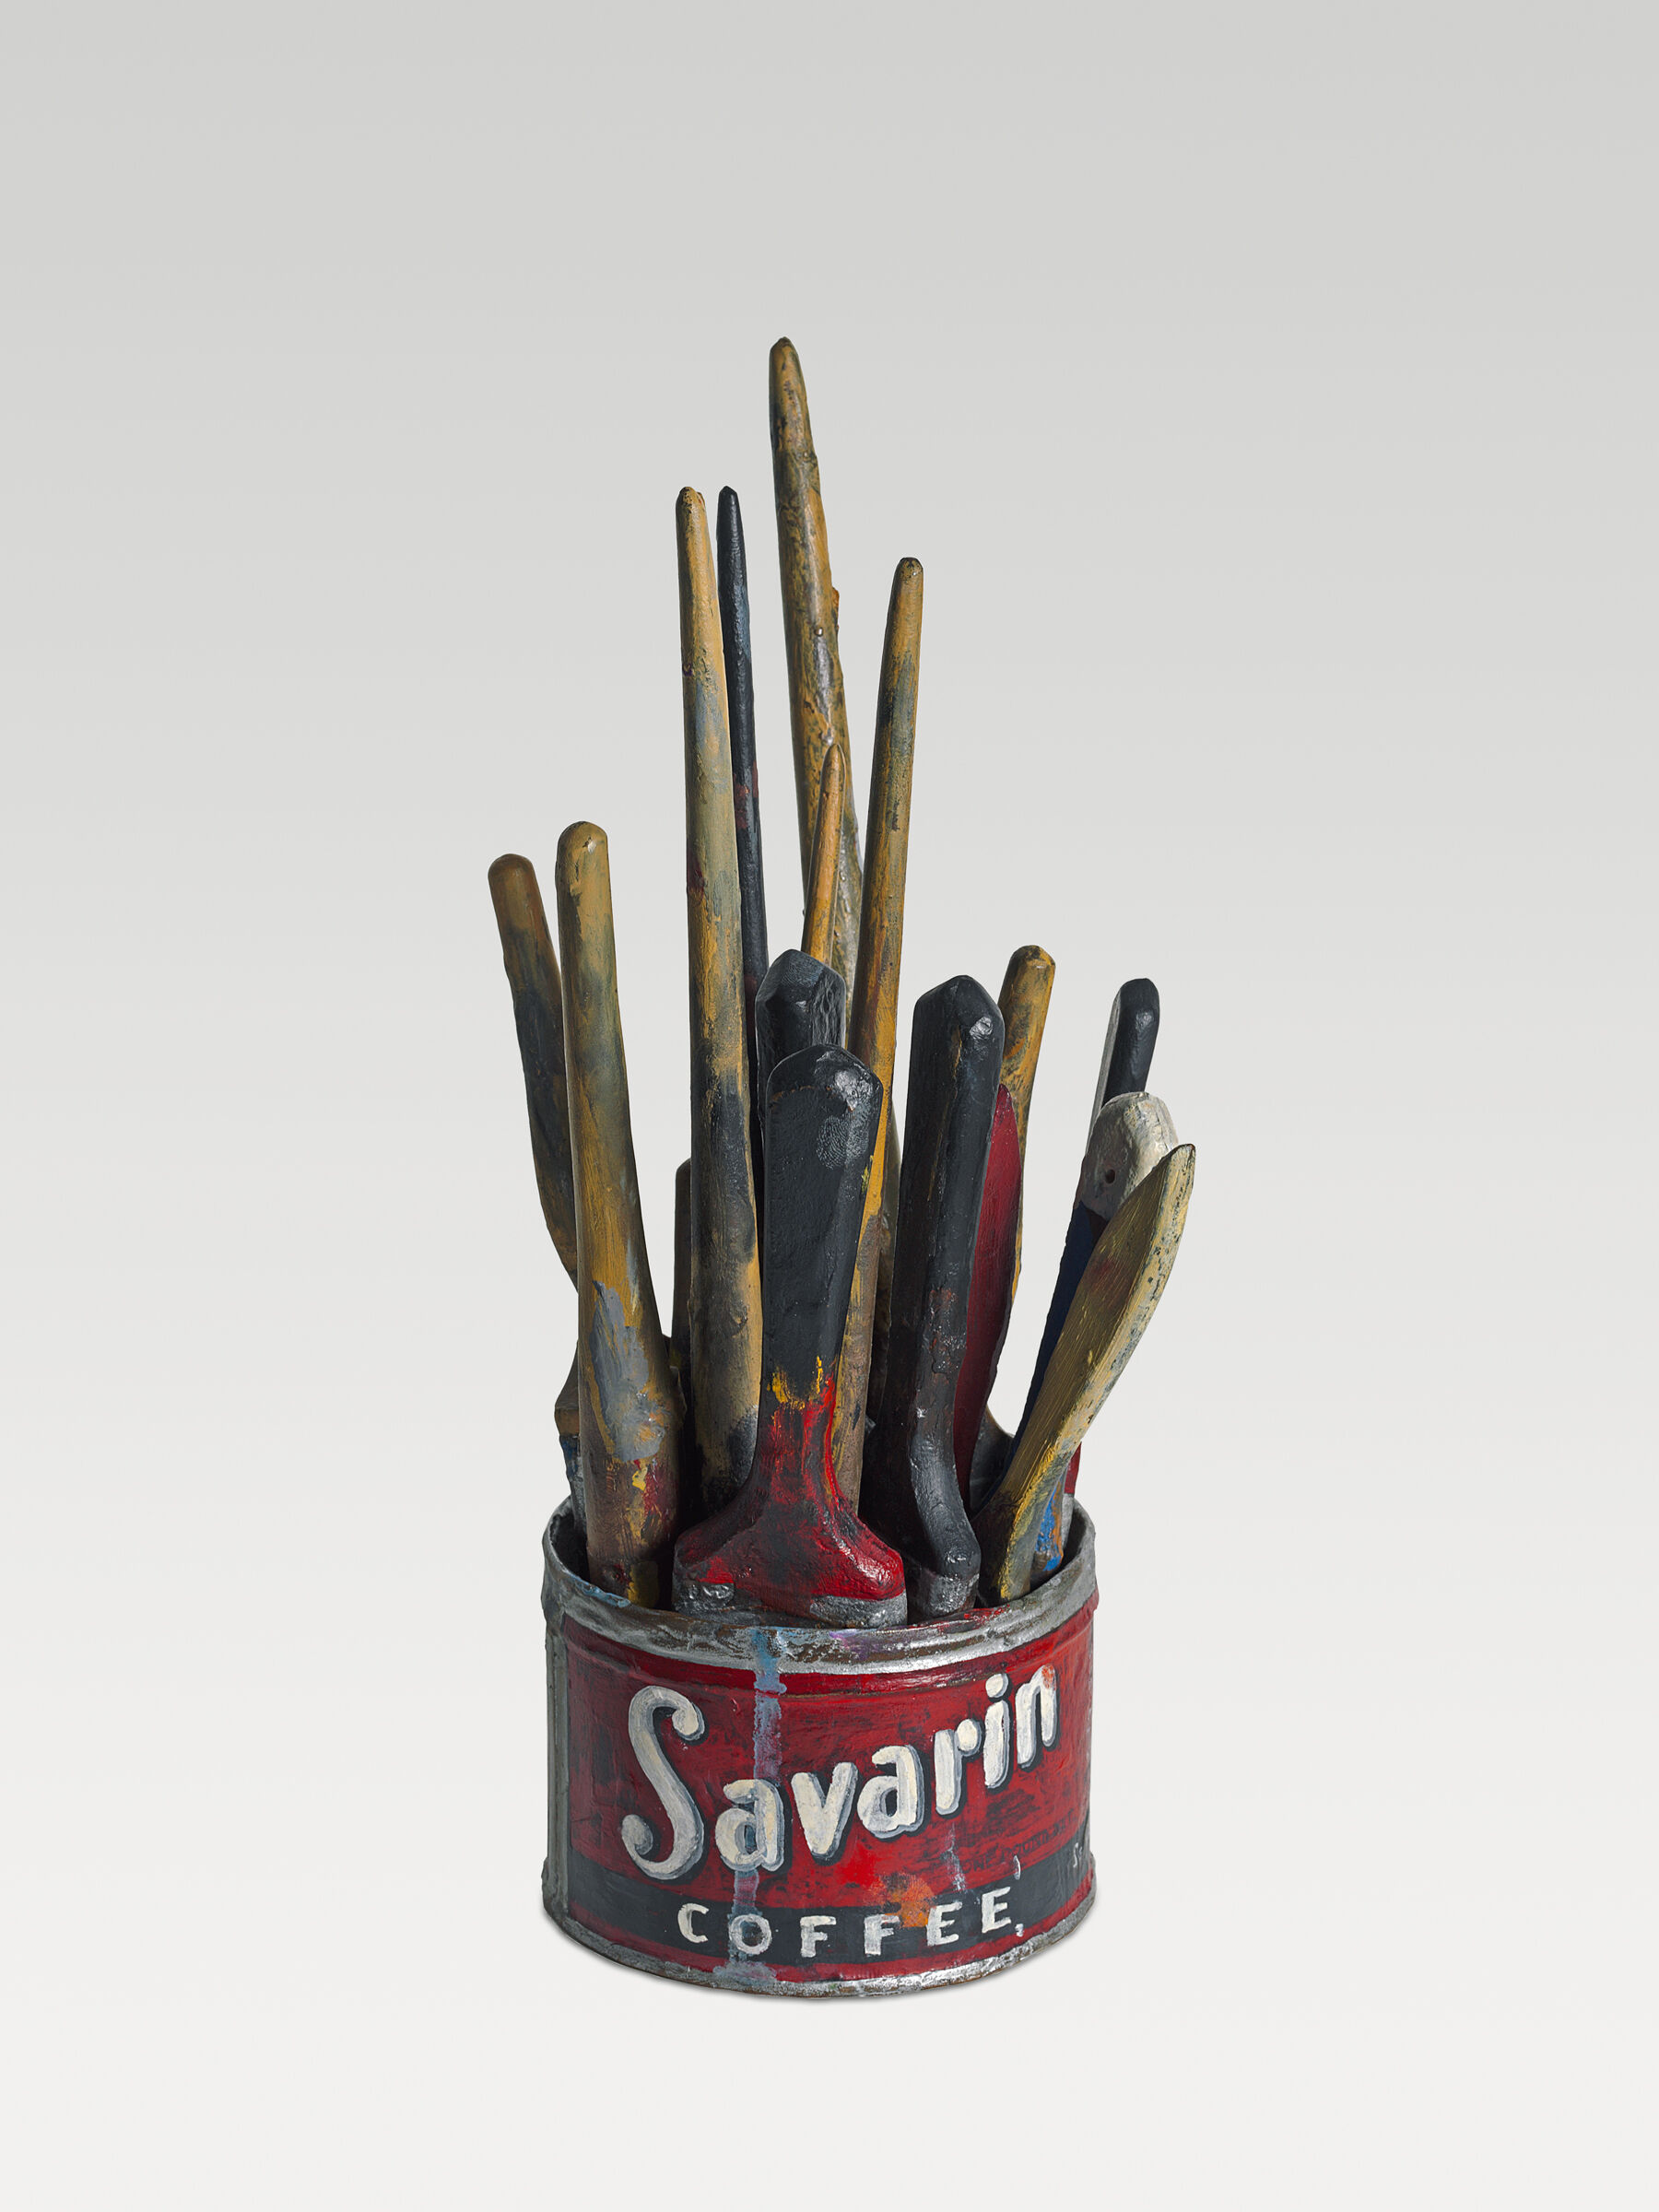 Sculpture of a red can of Savarin coffee filled with paintbrushes, their handles all sticking up and spattered with paint.